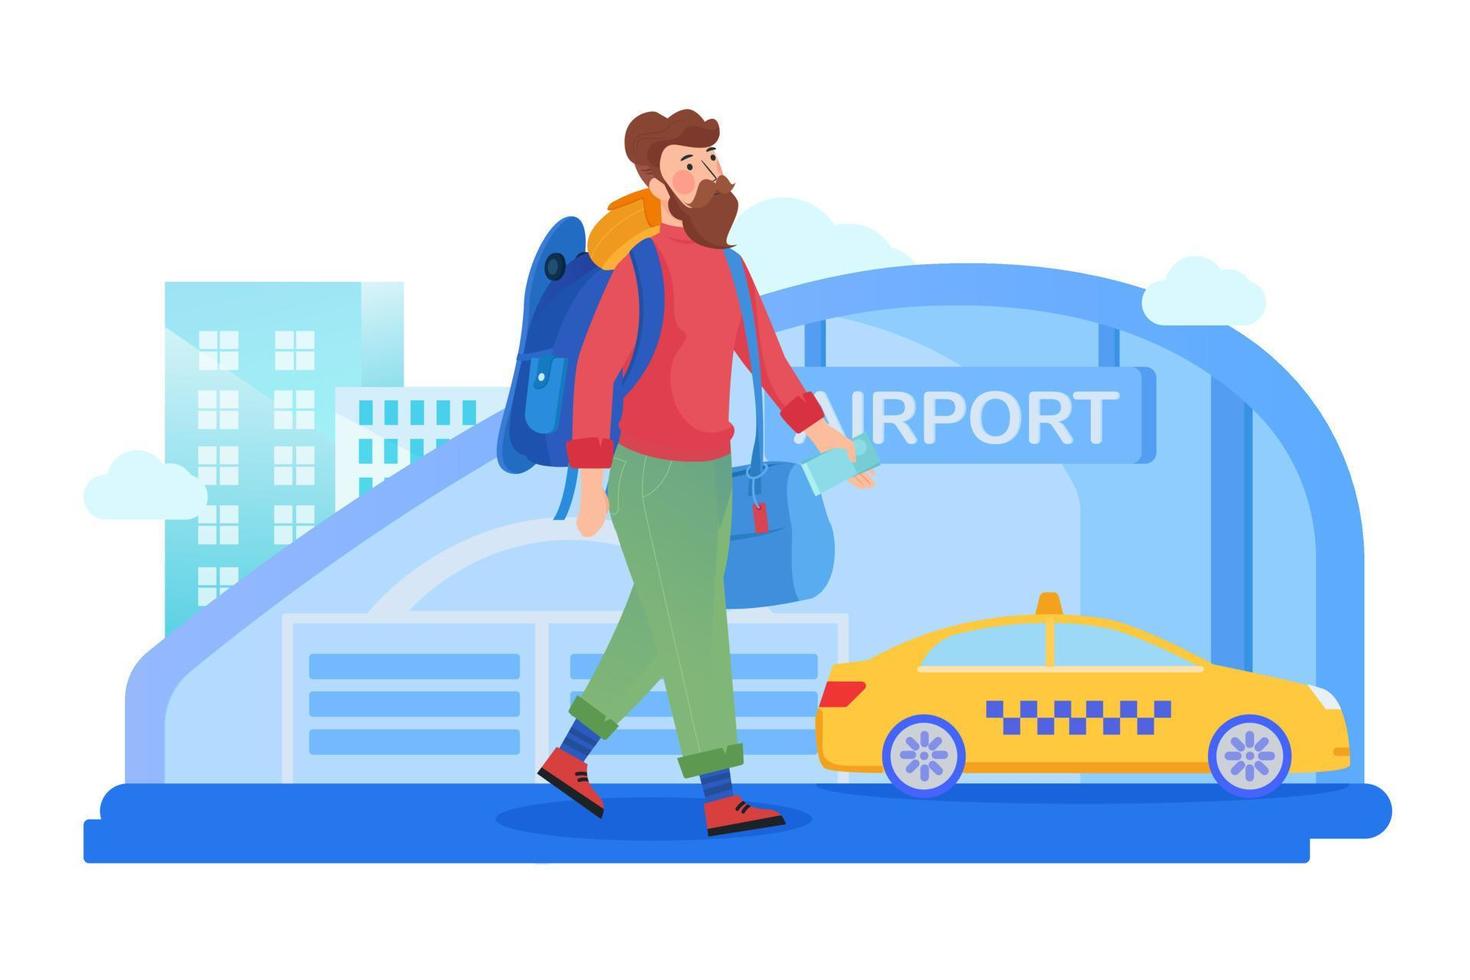 Air traveler. Hipster man with luggage goes to the airport. Vector illustration in cartoon style